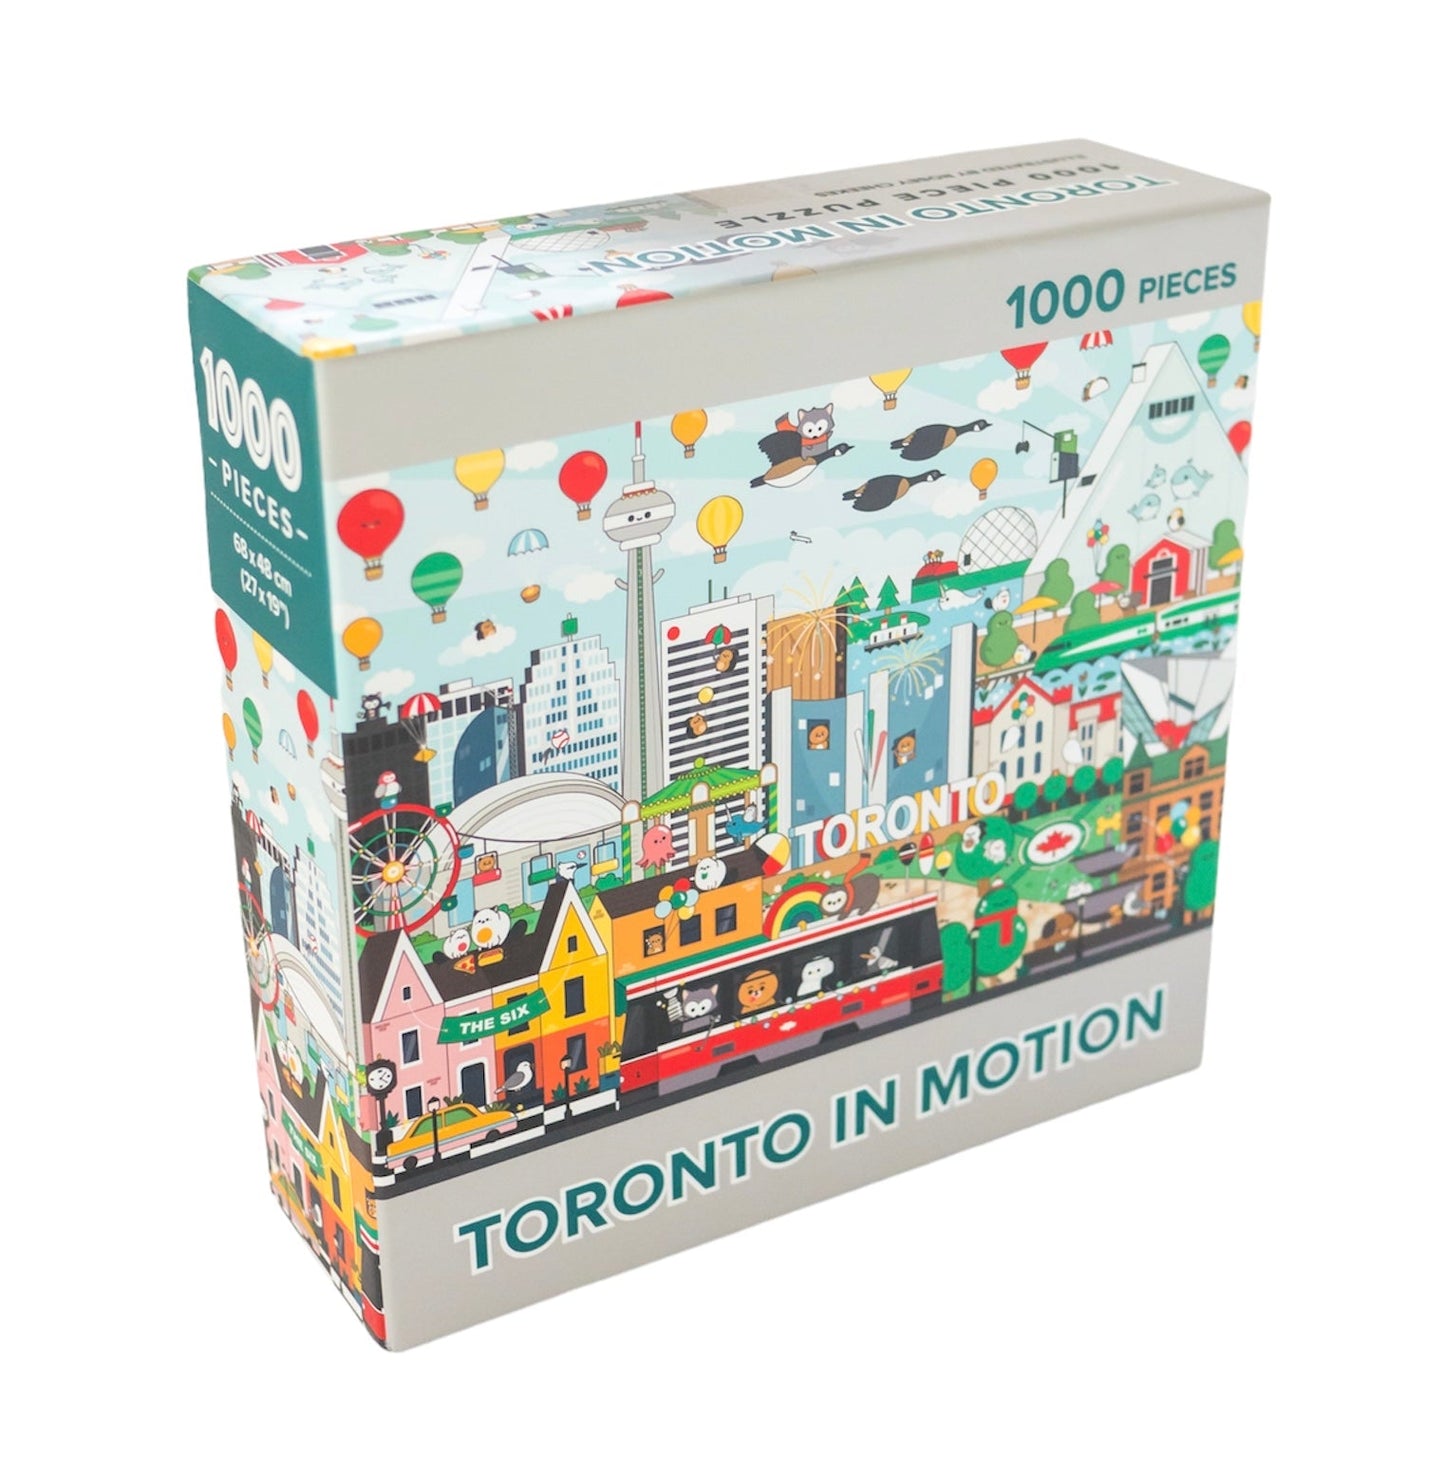 Damaged Box - 1000 pieces Toronto in Motion Jigsaw Puzzle